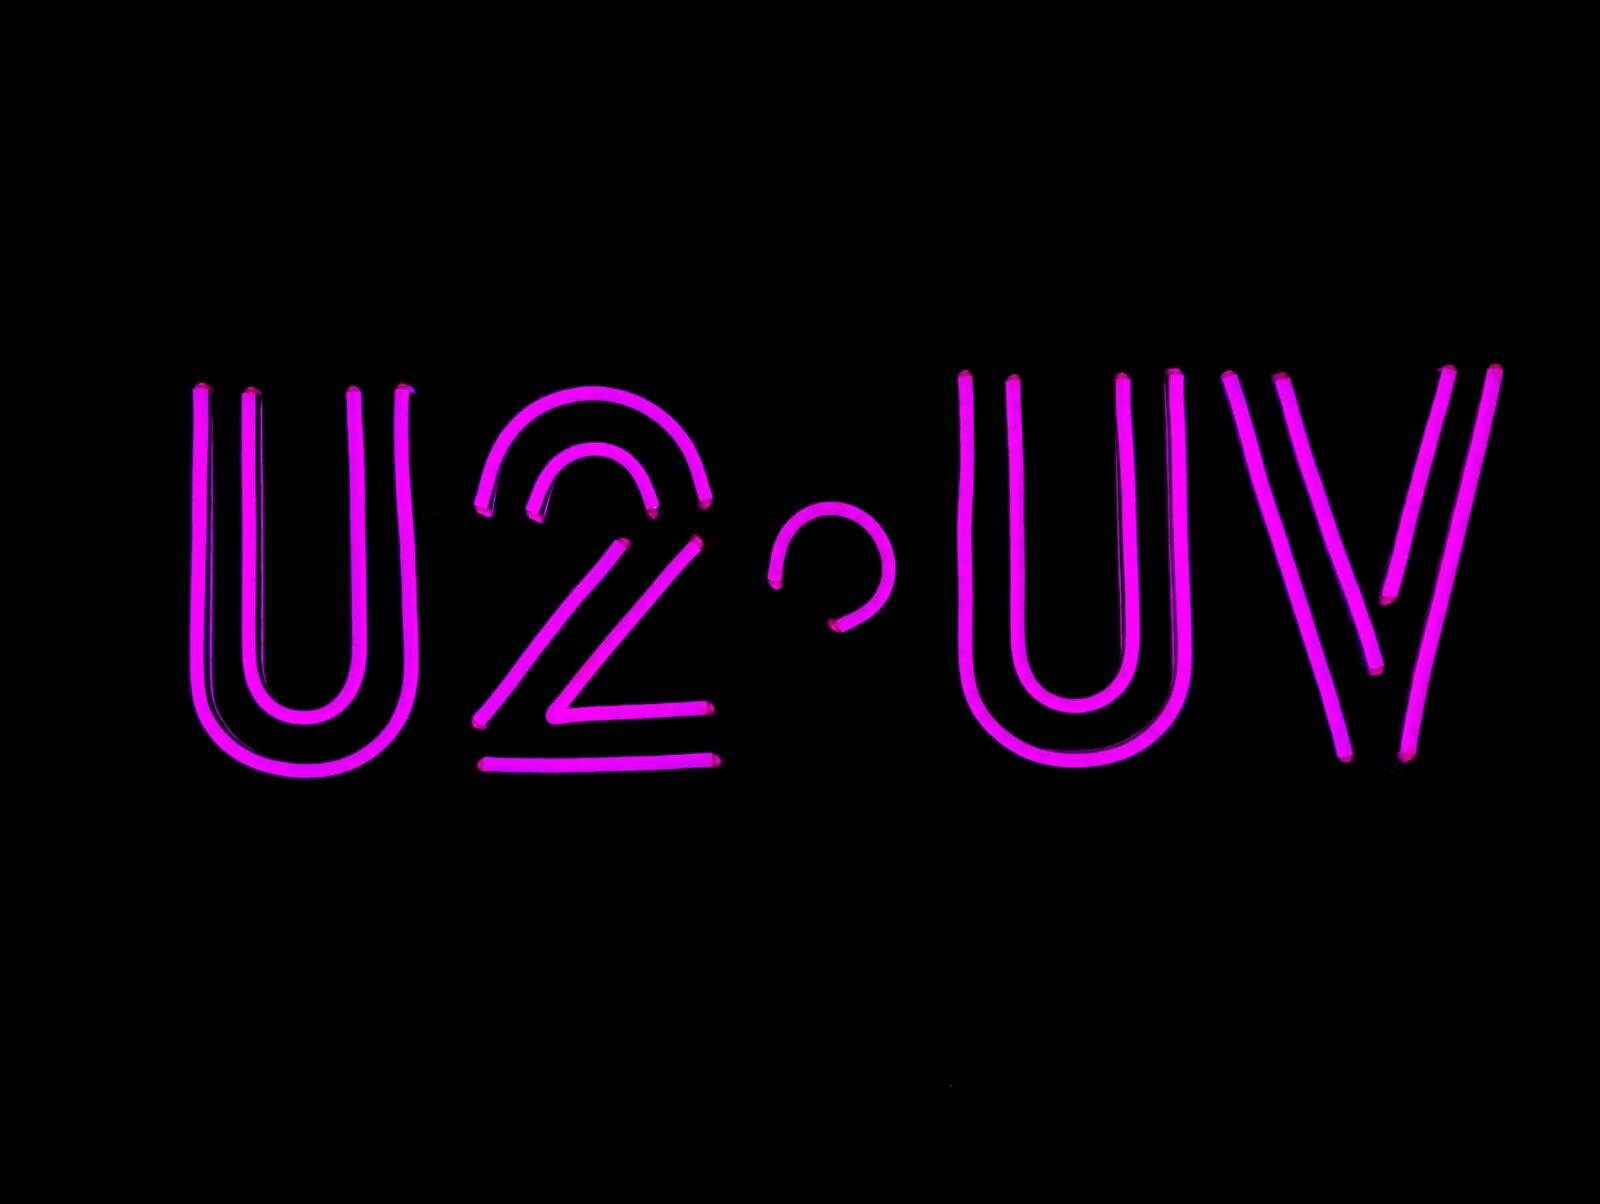 U2:UV LED Neon Sign, Achtung Baby, U2:UV Achtung Baby Live at Sphere